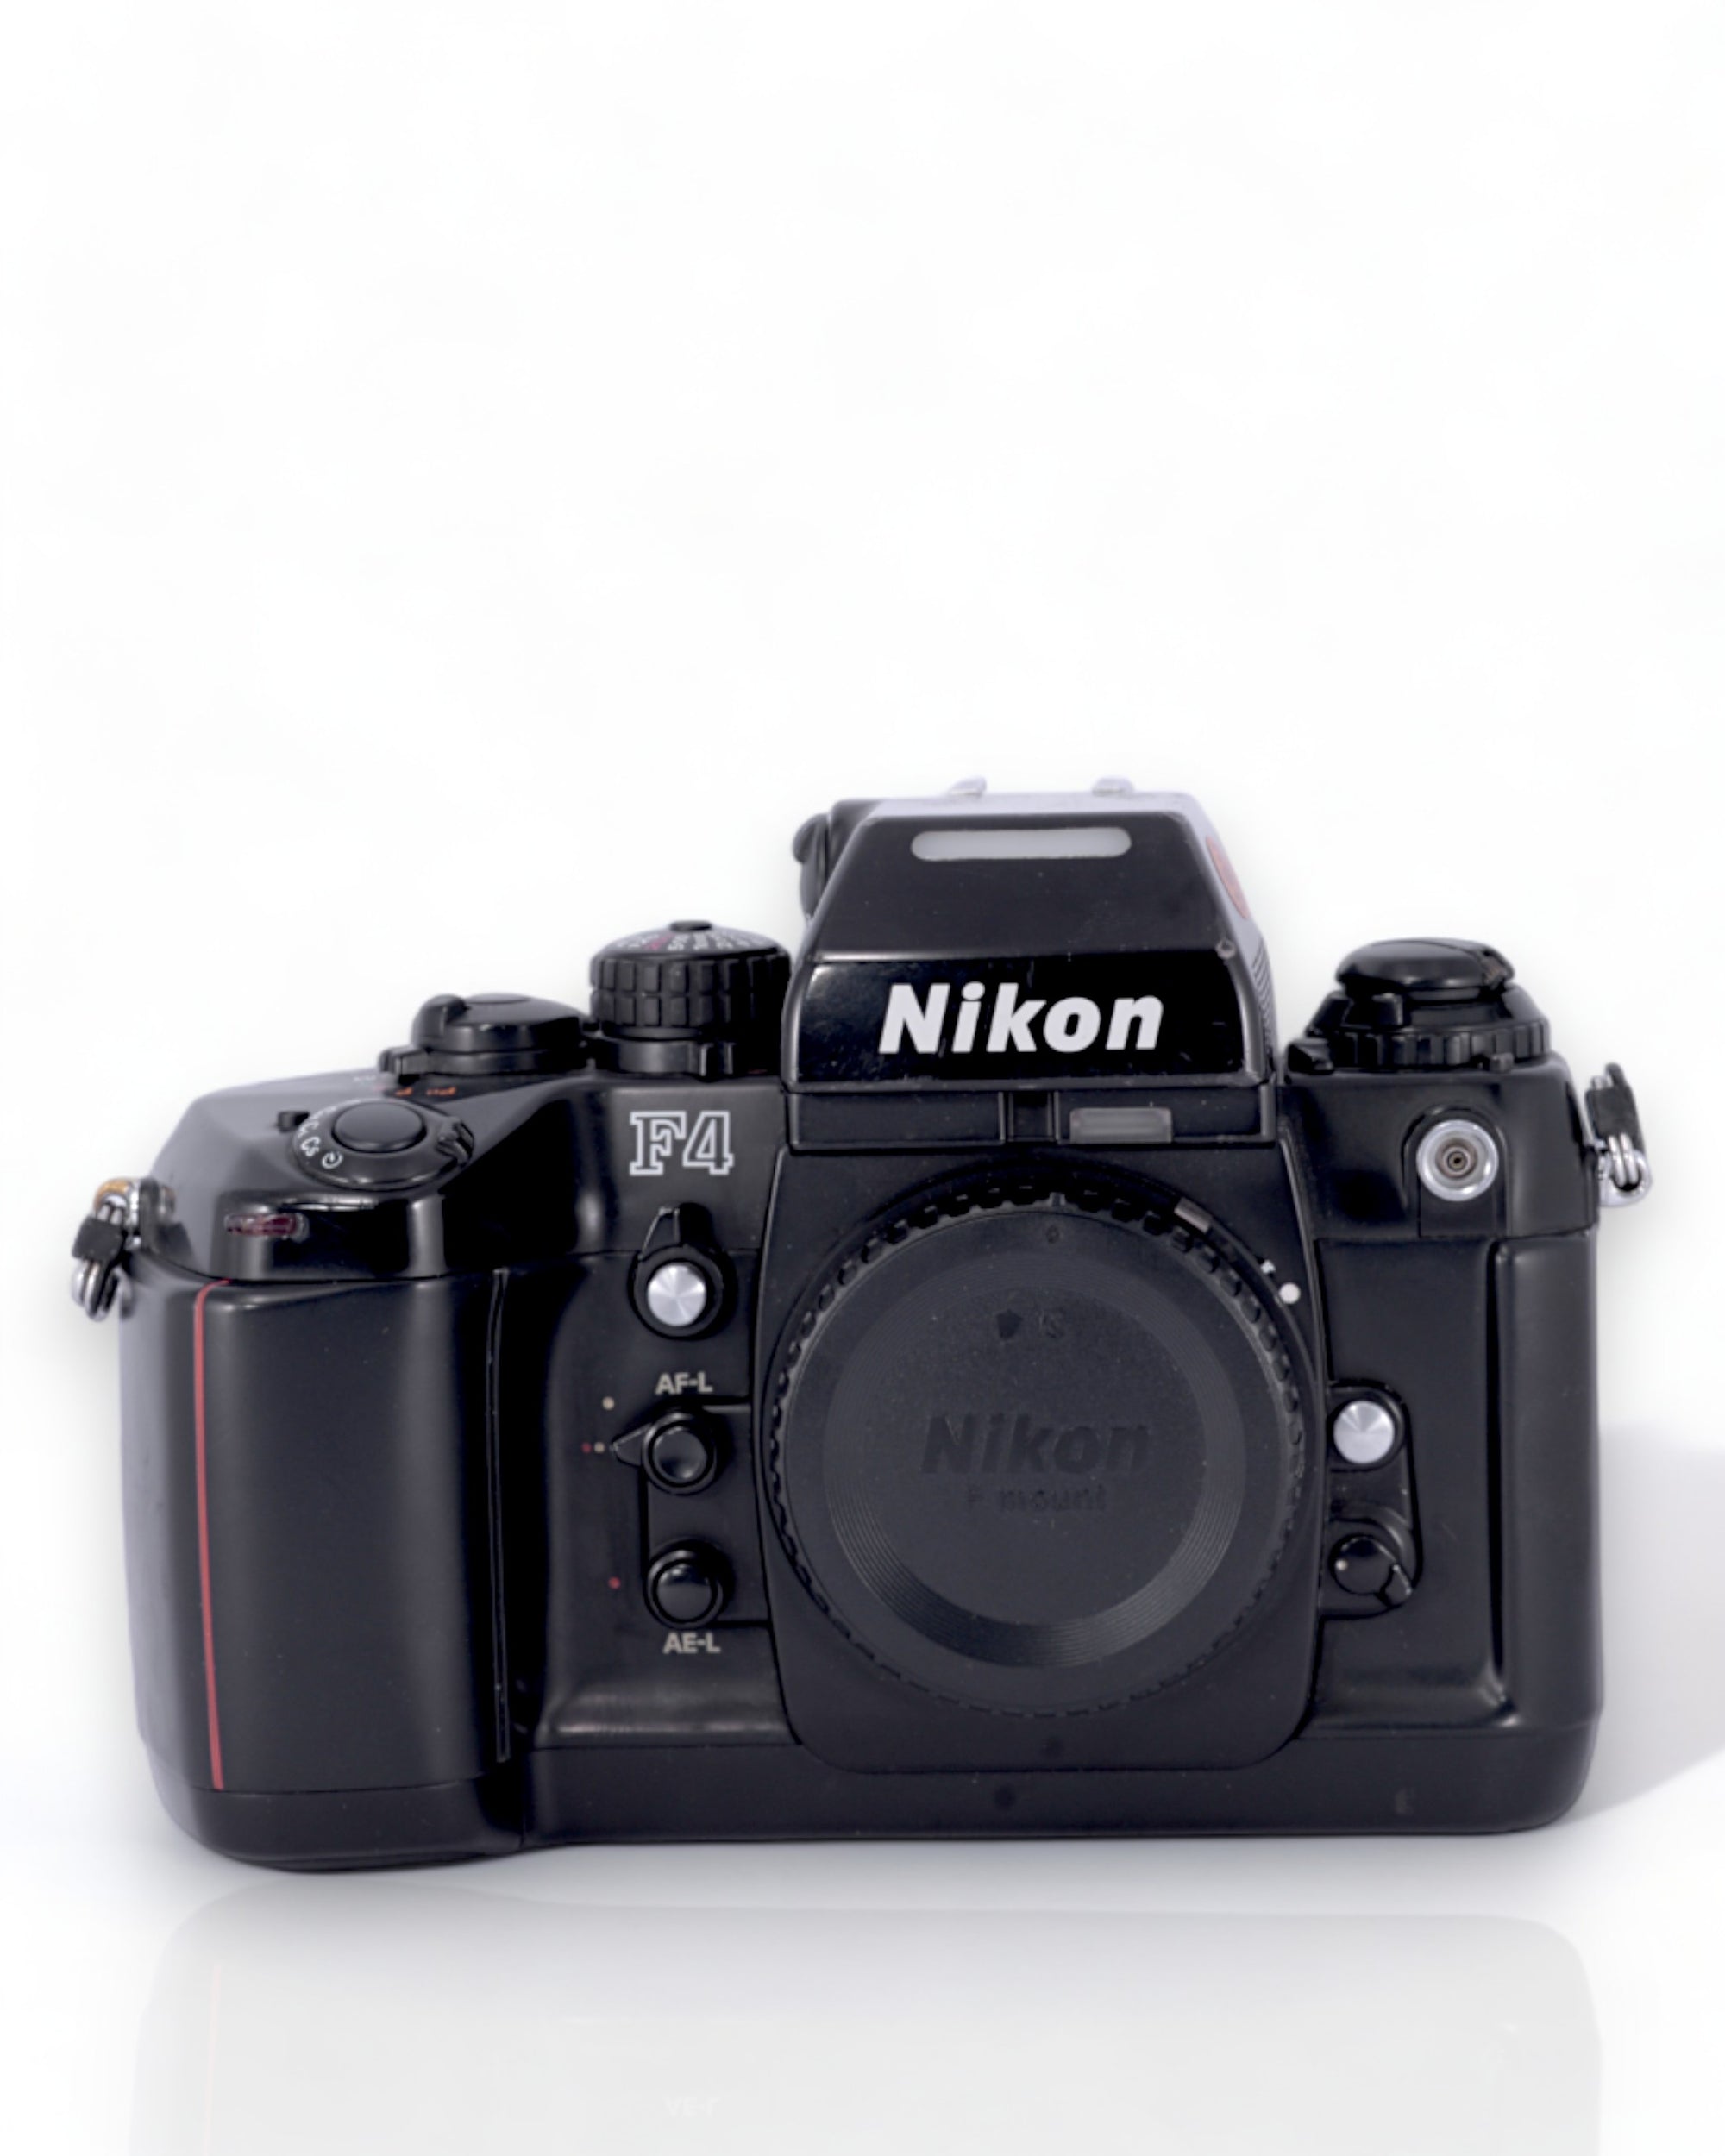 Nikon F4 35mm SLR body only with battery grip